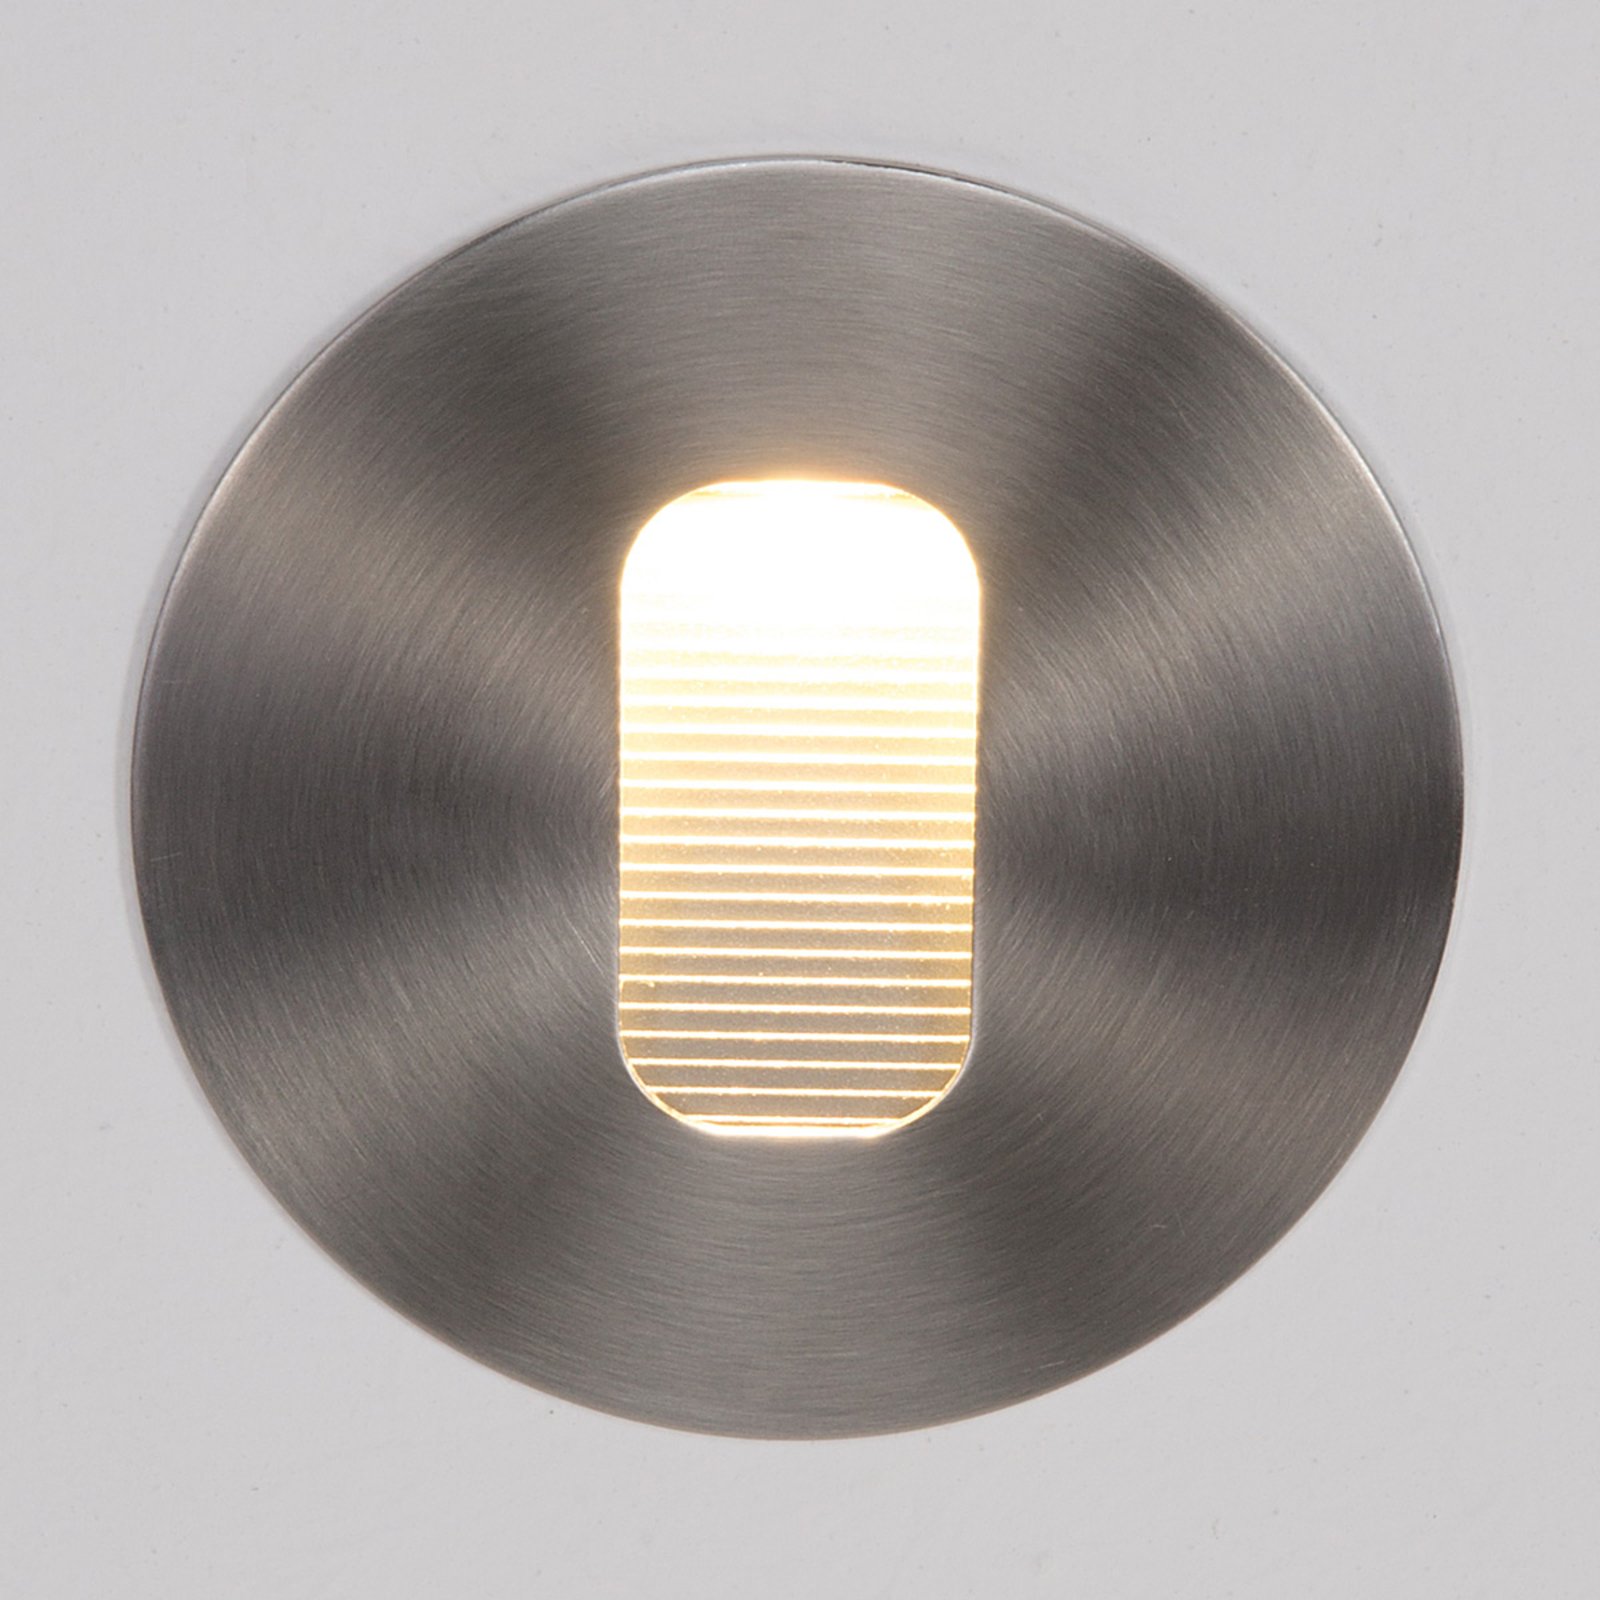 Round LED recessed wall light Telke for outdoors